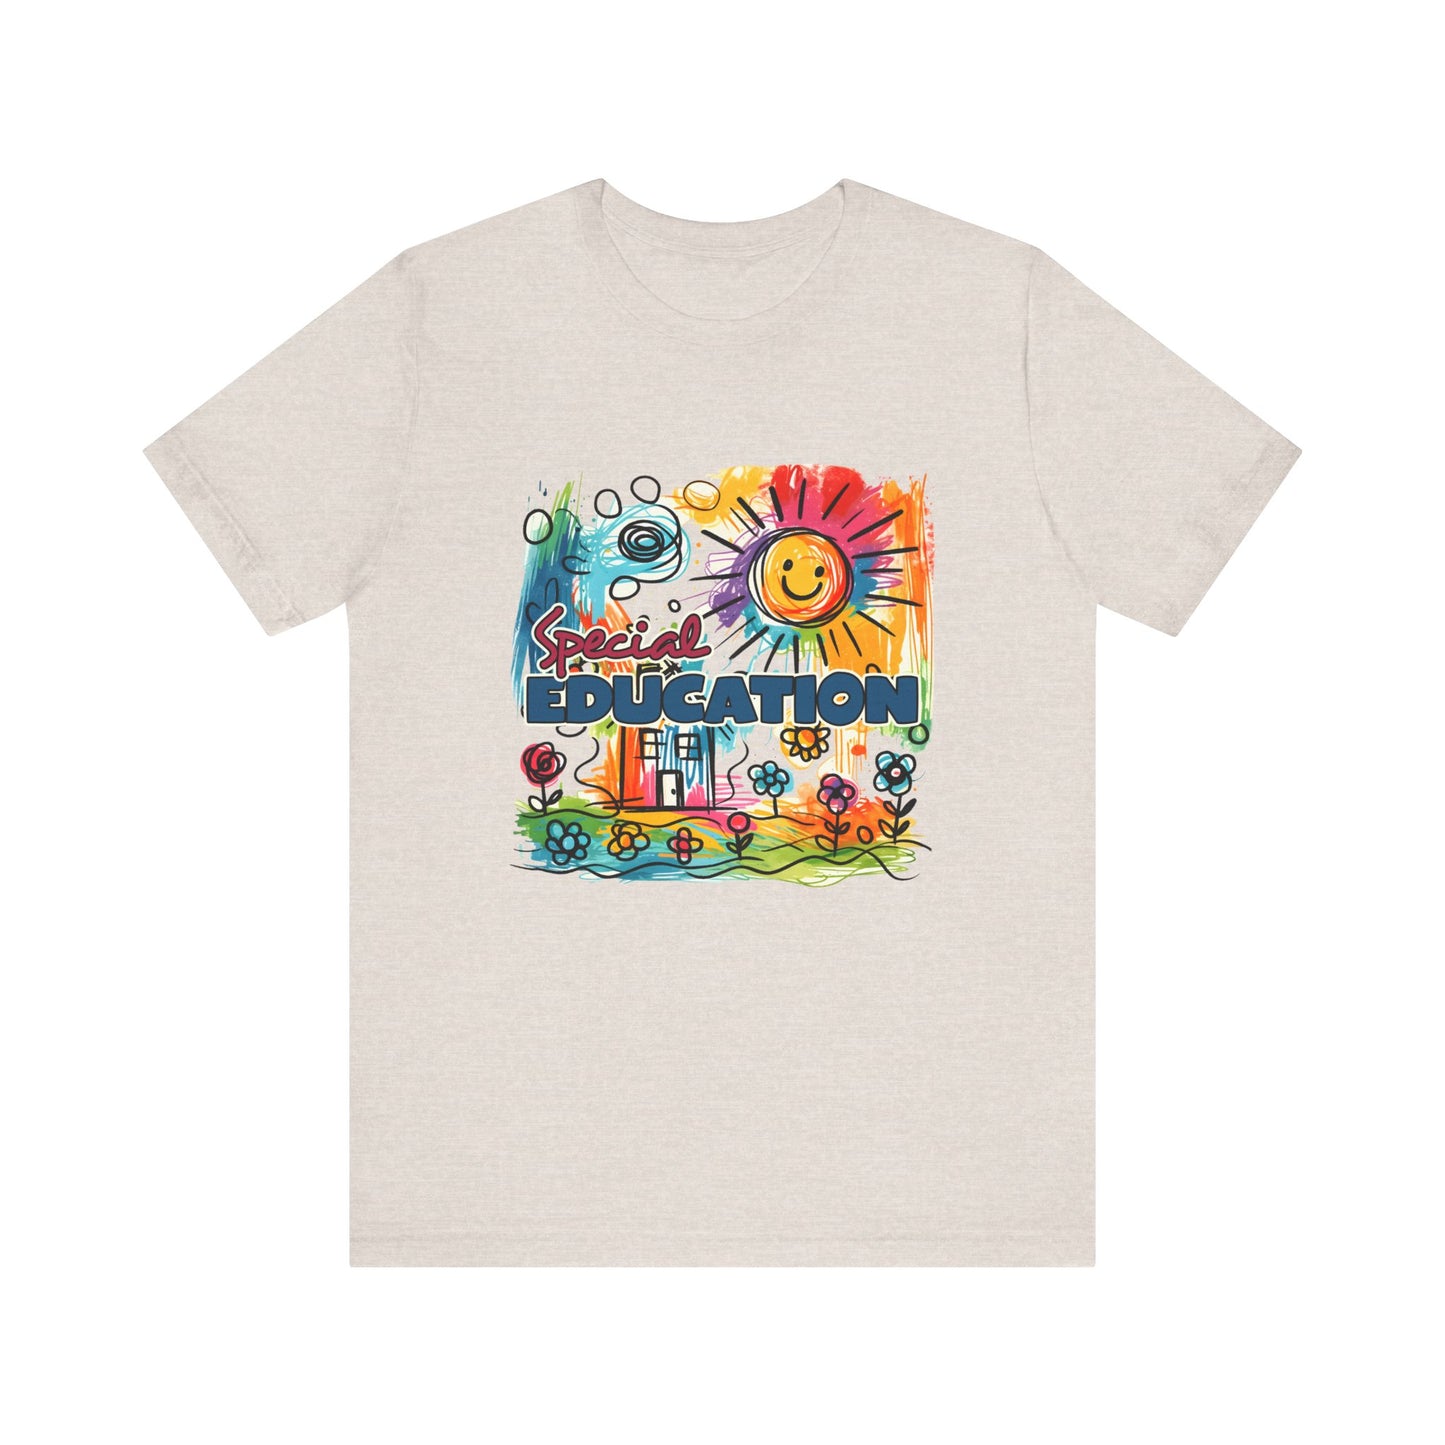 Special Education Autism Advocate Short Sleeve Tee